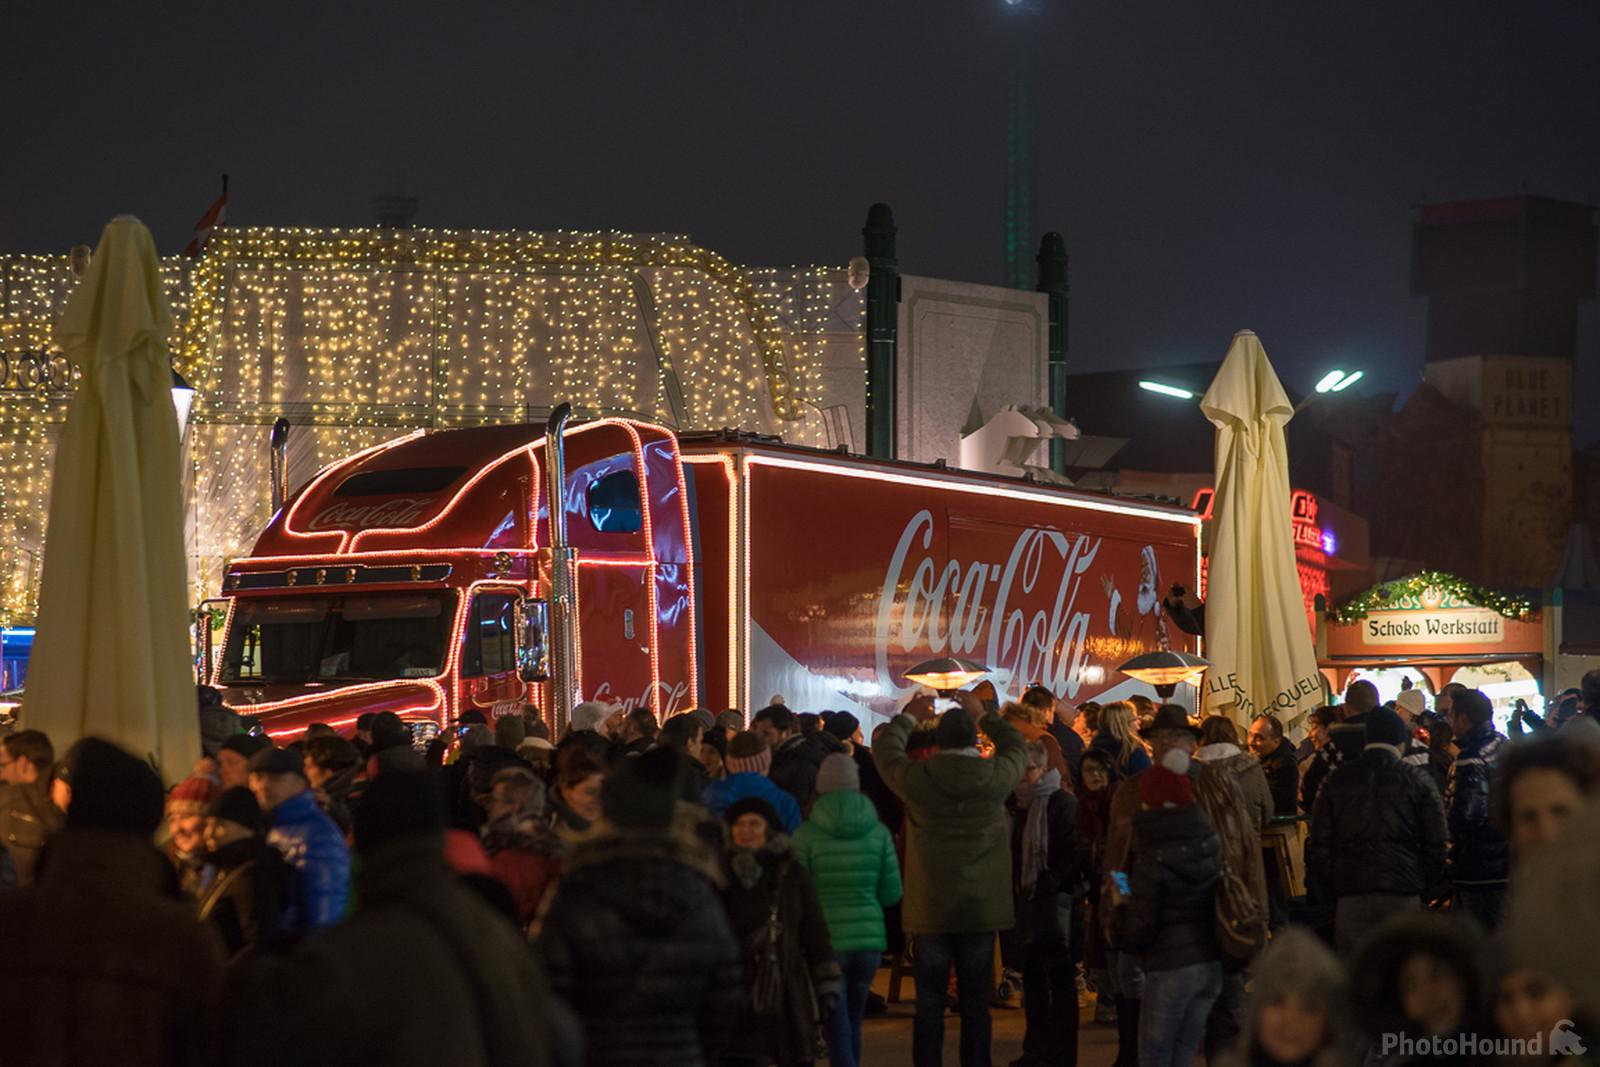 Image of Vienna Christmas Markets by James Billings.